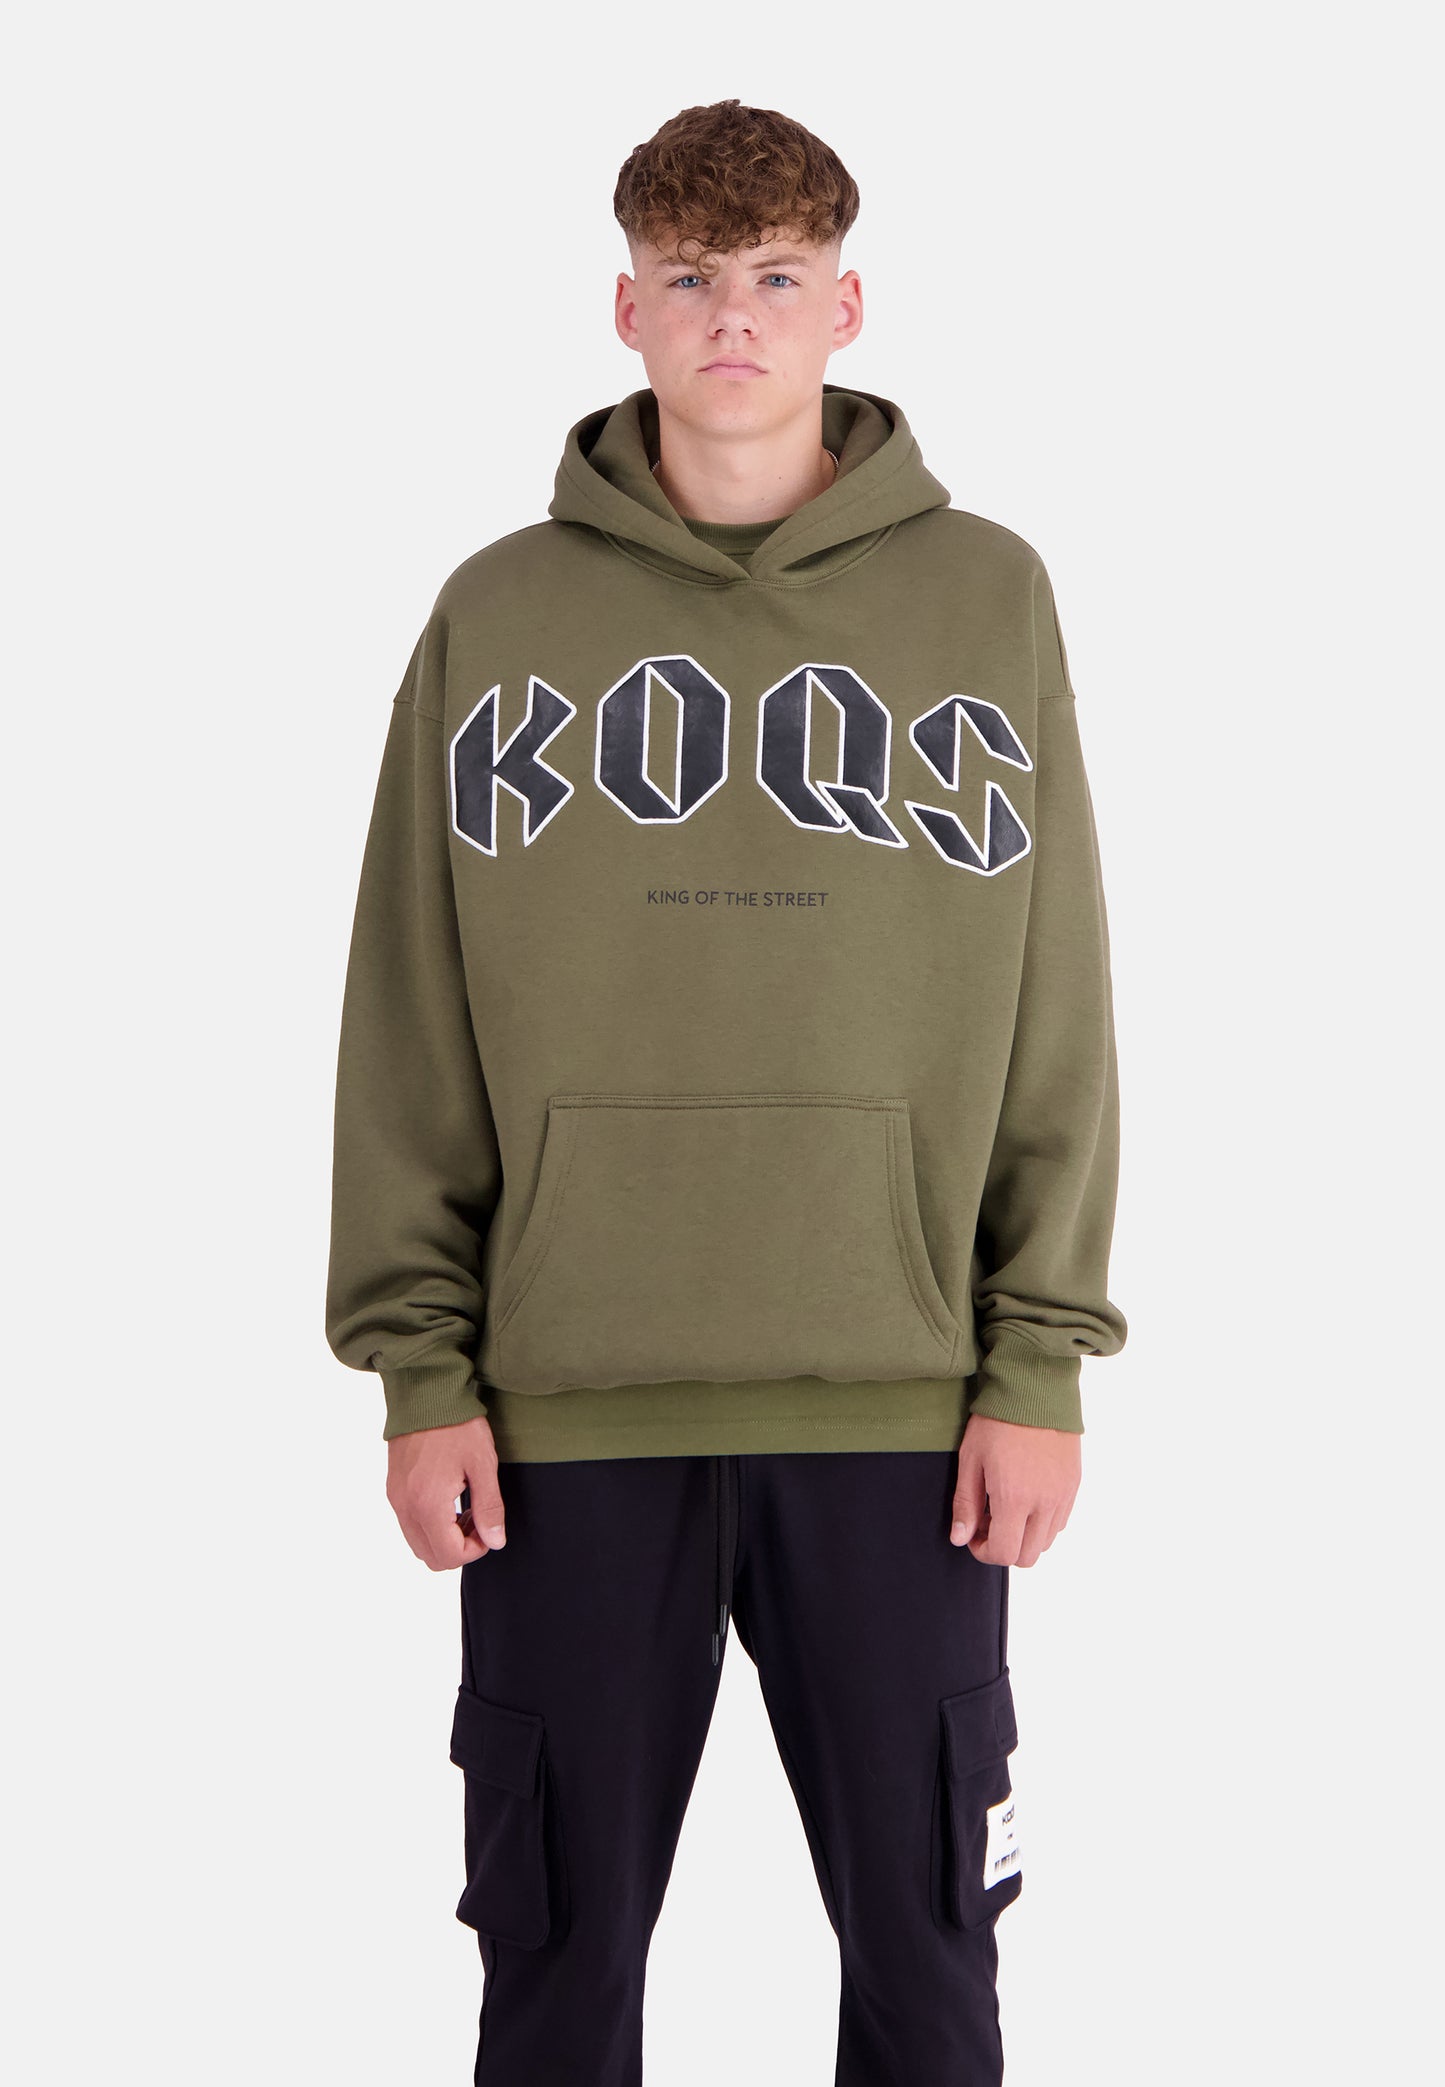 King of the street PU patch Hoodie